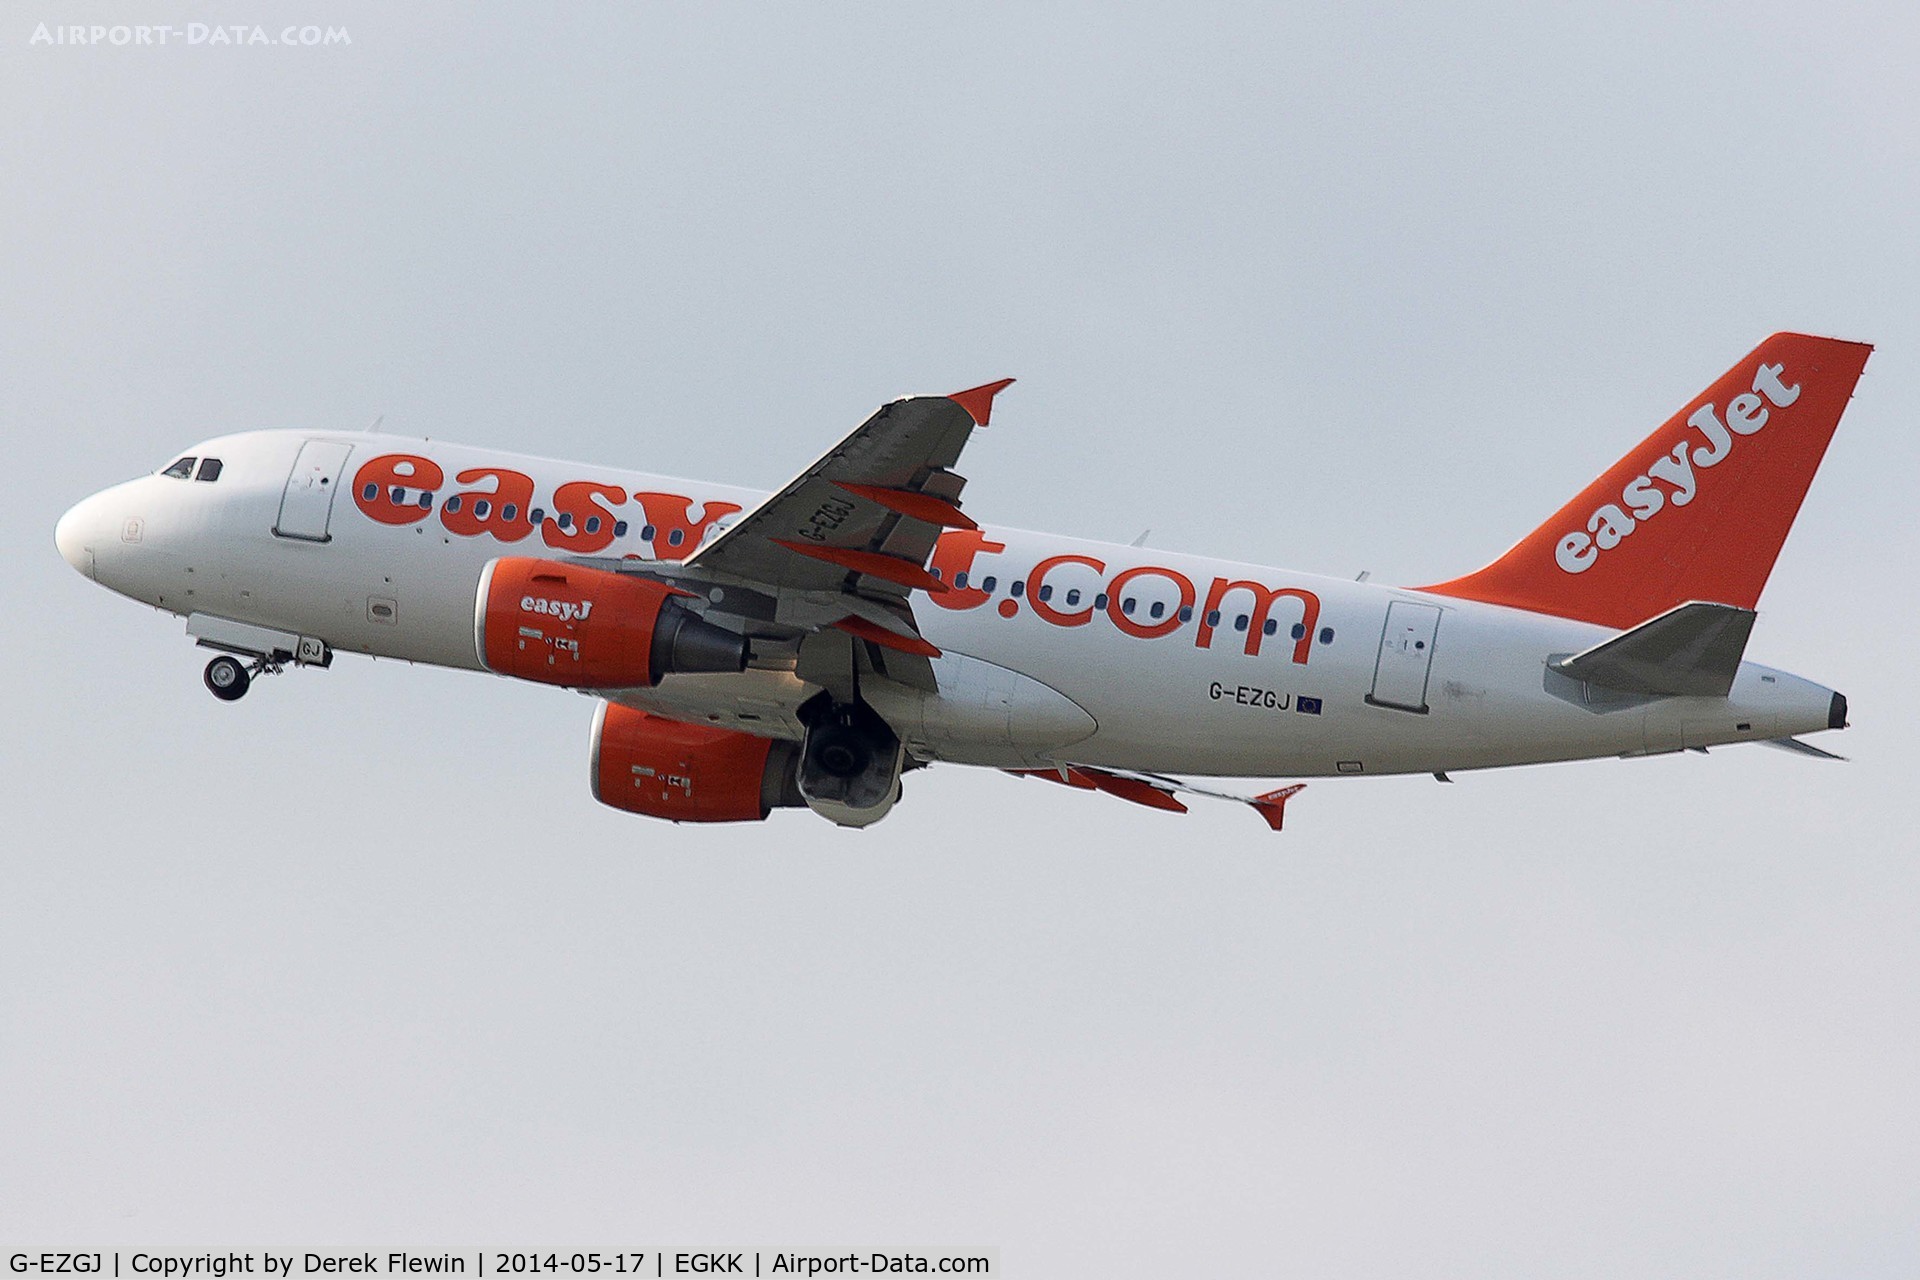 G-EZGJ, 2011 Airbus A319-111 C/N 4705, Seen pulling out from runway 26R at EGKK.